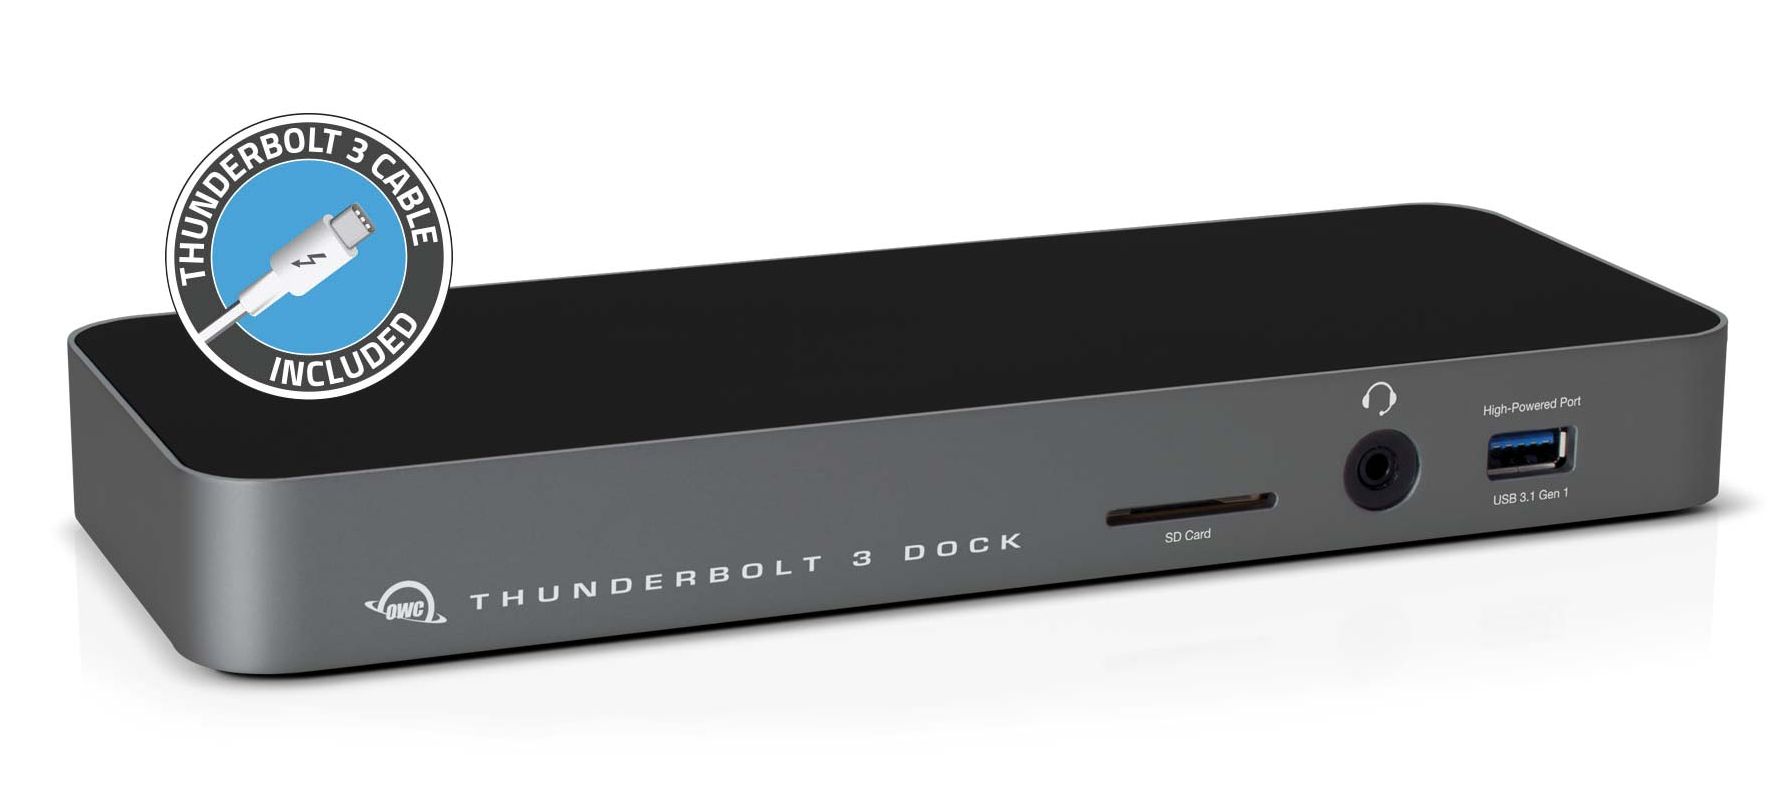 OWC Thunderbolt 3 Dock Review: It Gives Your MacBook Pro 13 Extra Ports